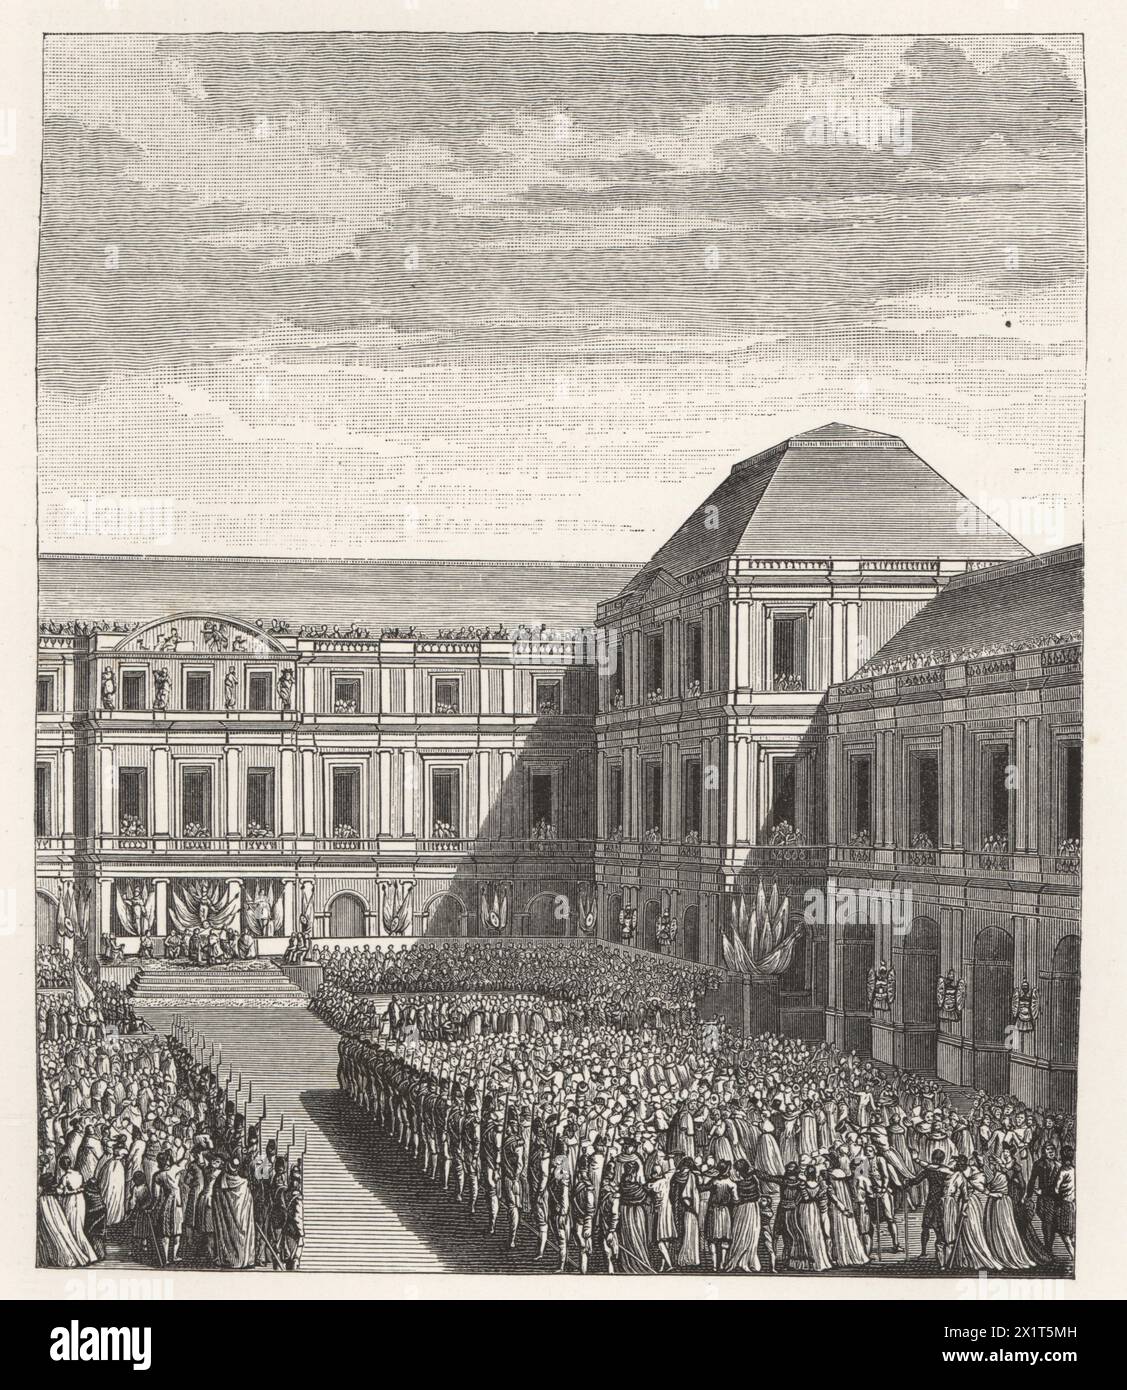 Celebration of Napoleon Bonaparte at the Palace of the Directory after signing the Treaty of Campo Formio with the Austrians, 1797. Fete donnee a Bonaparte, au palais national du Directoire, apres le traite de Campo-Formio. Engraving by Pierre-Gabriel Berthault after an illustration by Abraham Girardet from Paul Lacroix's Directoire, Consulat et Empire, (Directory, Consulate and Empire), Paris, 1884. Stock Photo